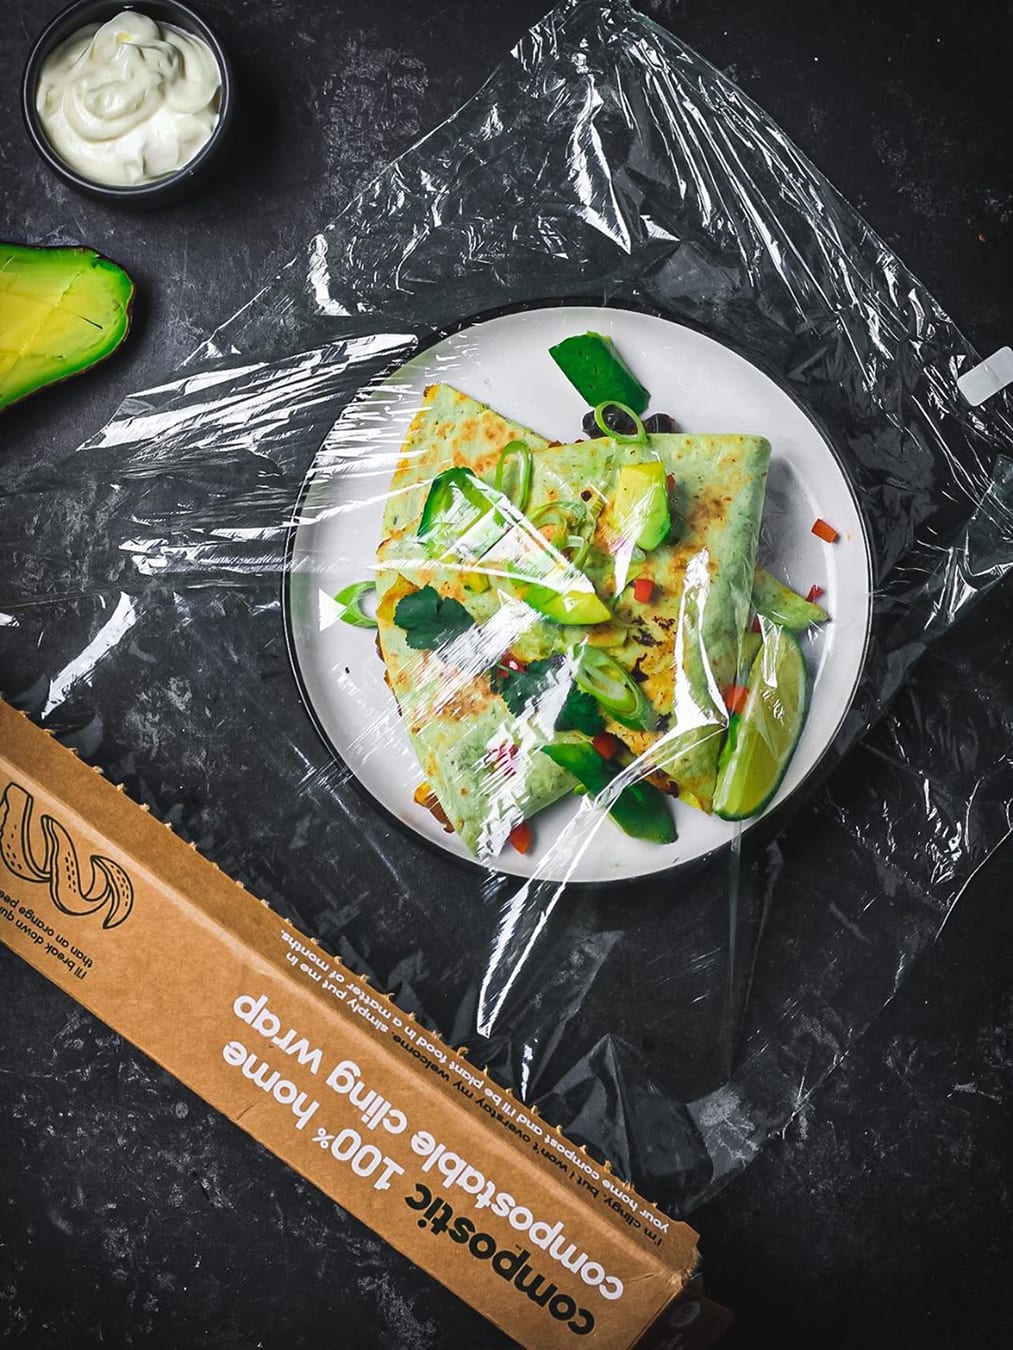 Home compostable cling film company launches in United States